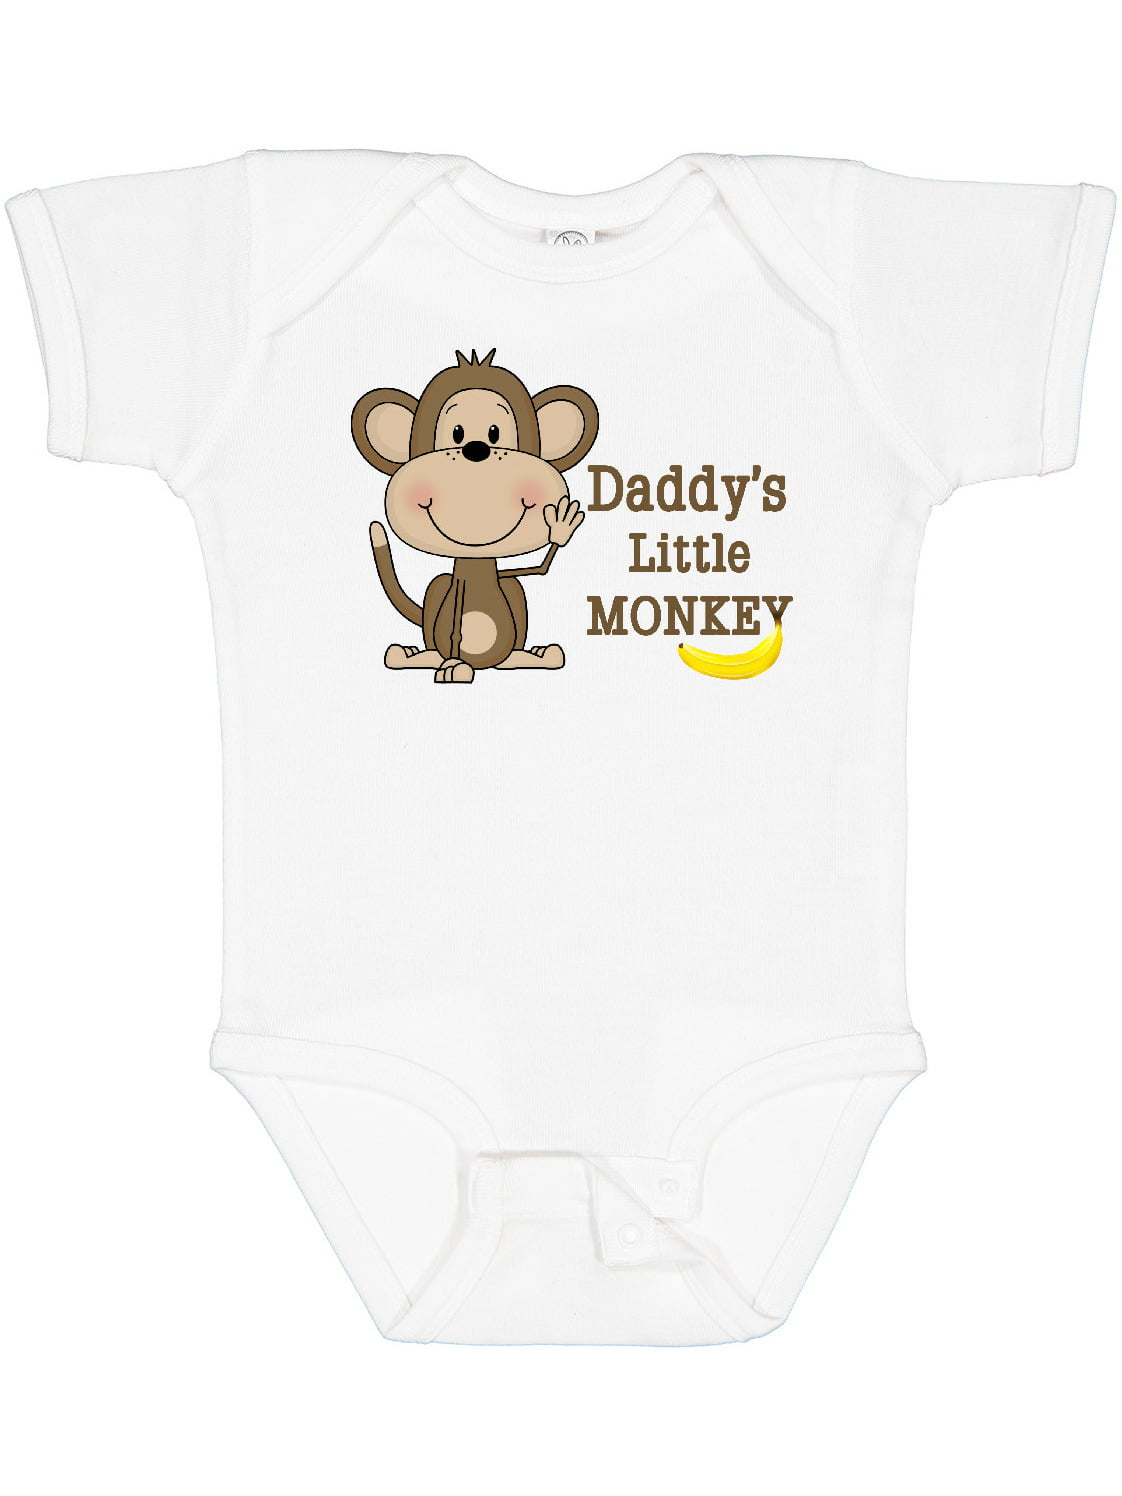 Baby Shower Gift Ideas Monkey Onesies Monkey Cute Baby Clothes Short/Long Sleeve Baby Onesies Bananas For Daddy Cute Baby Clothes